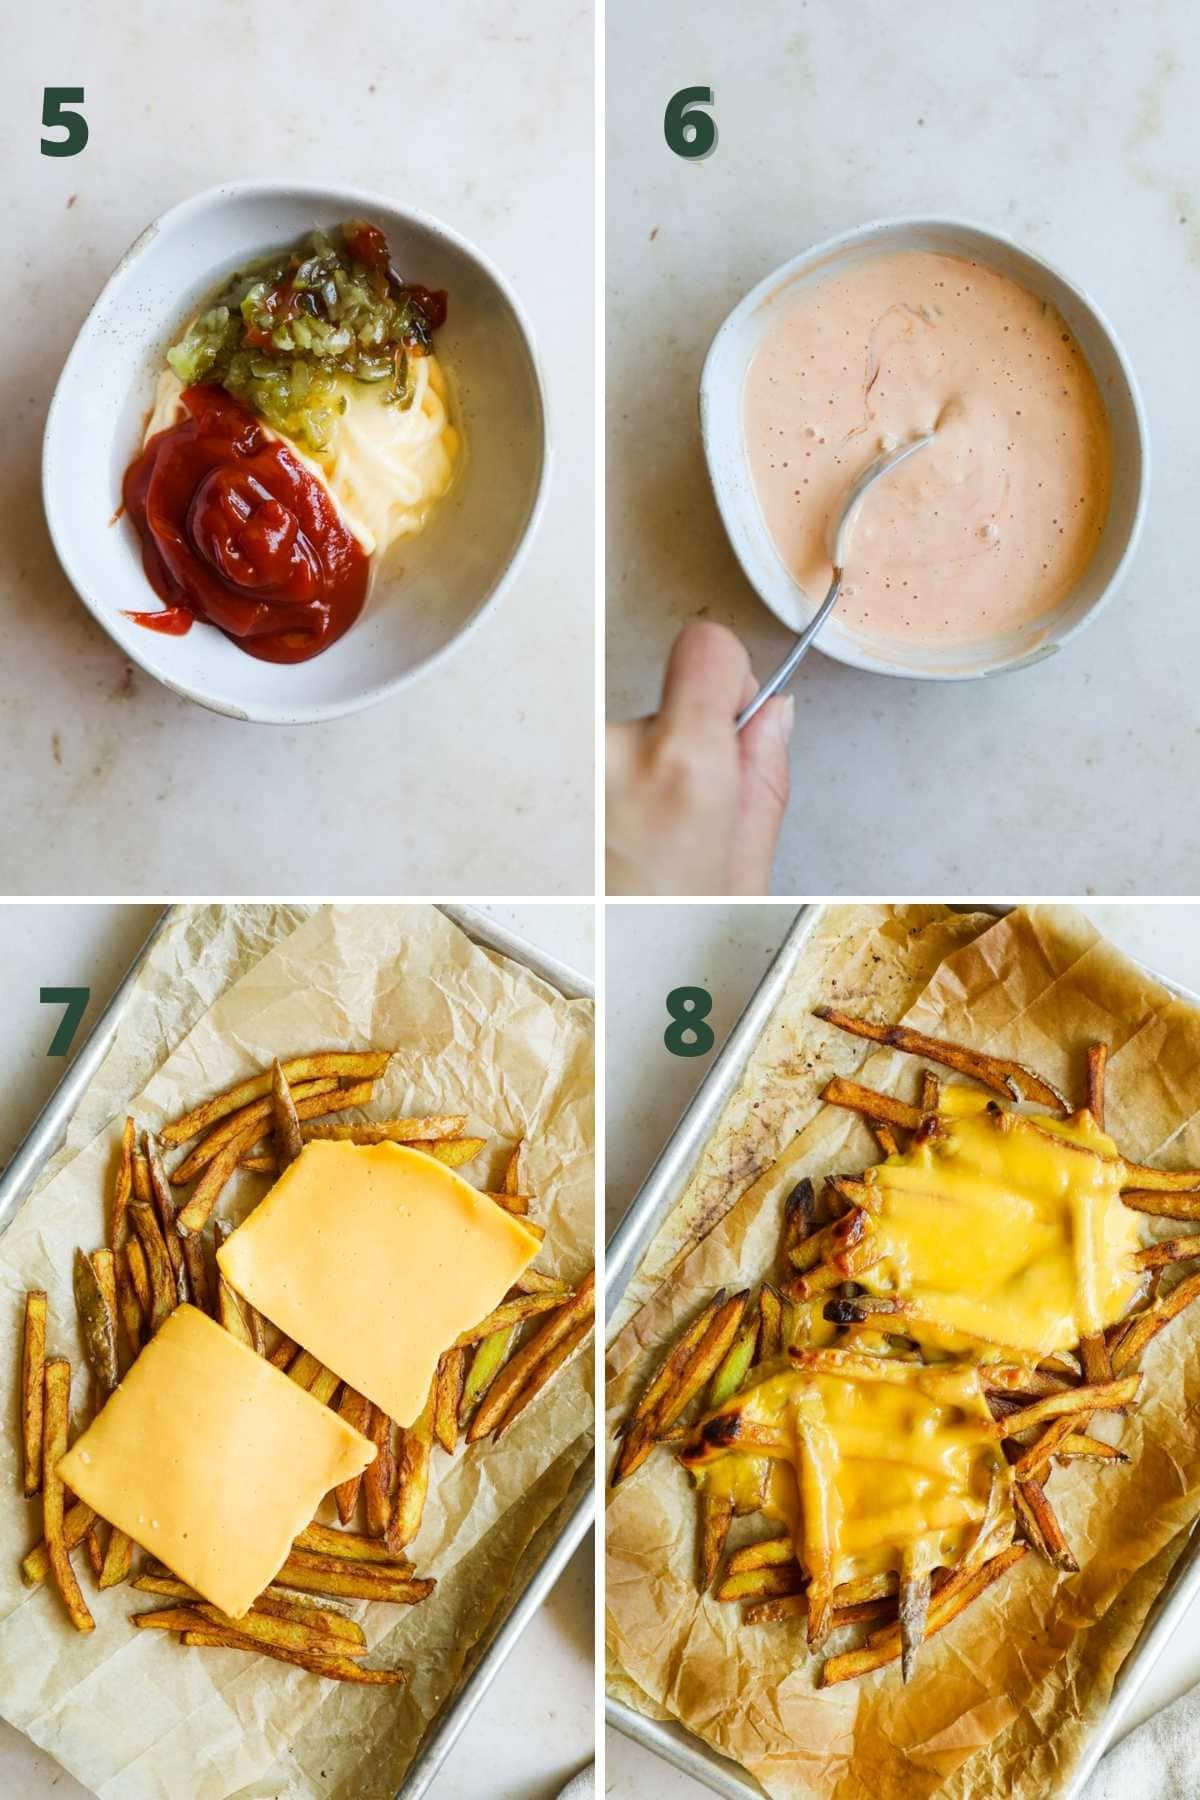 Steps to make In-n-Out animal-style fries copycat recipe.